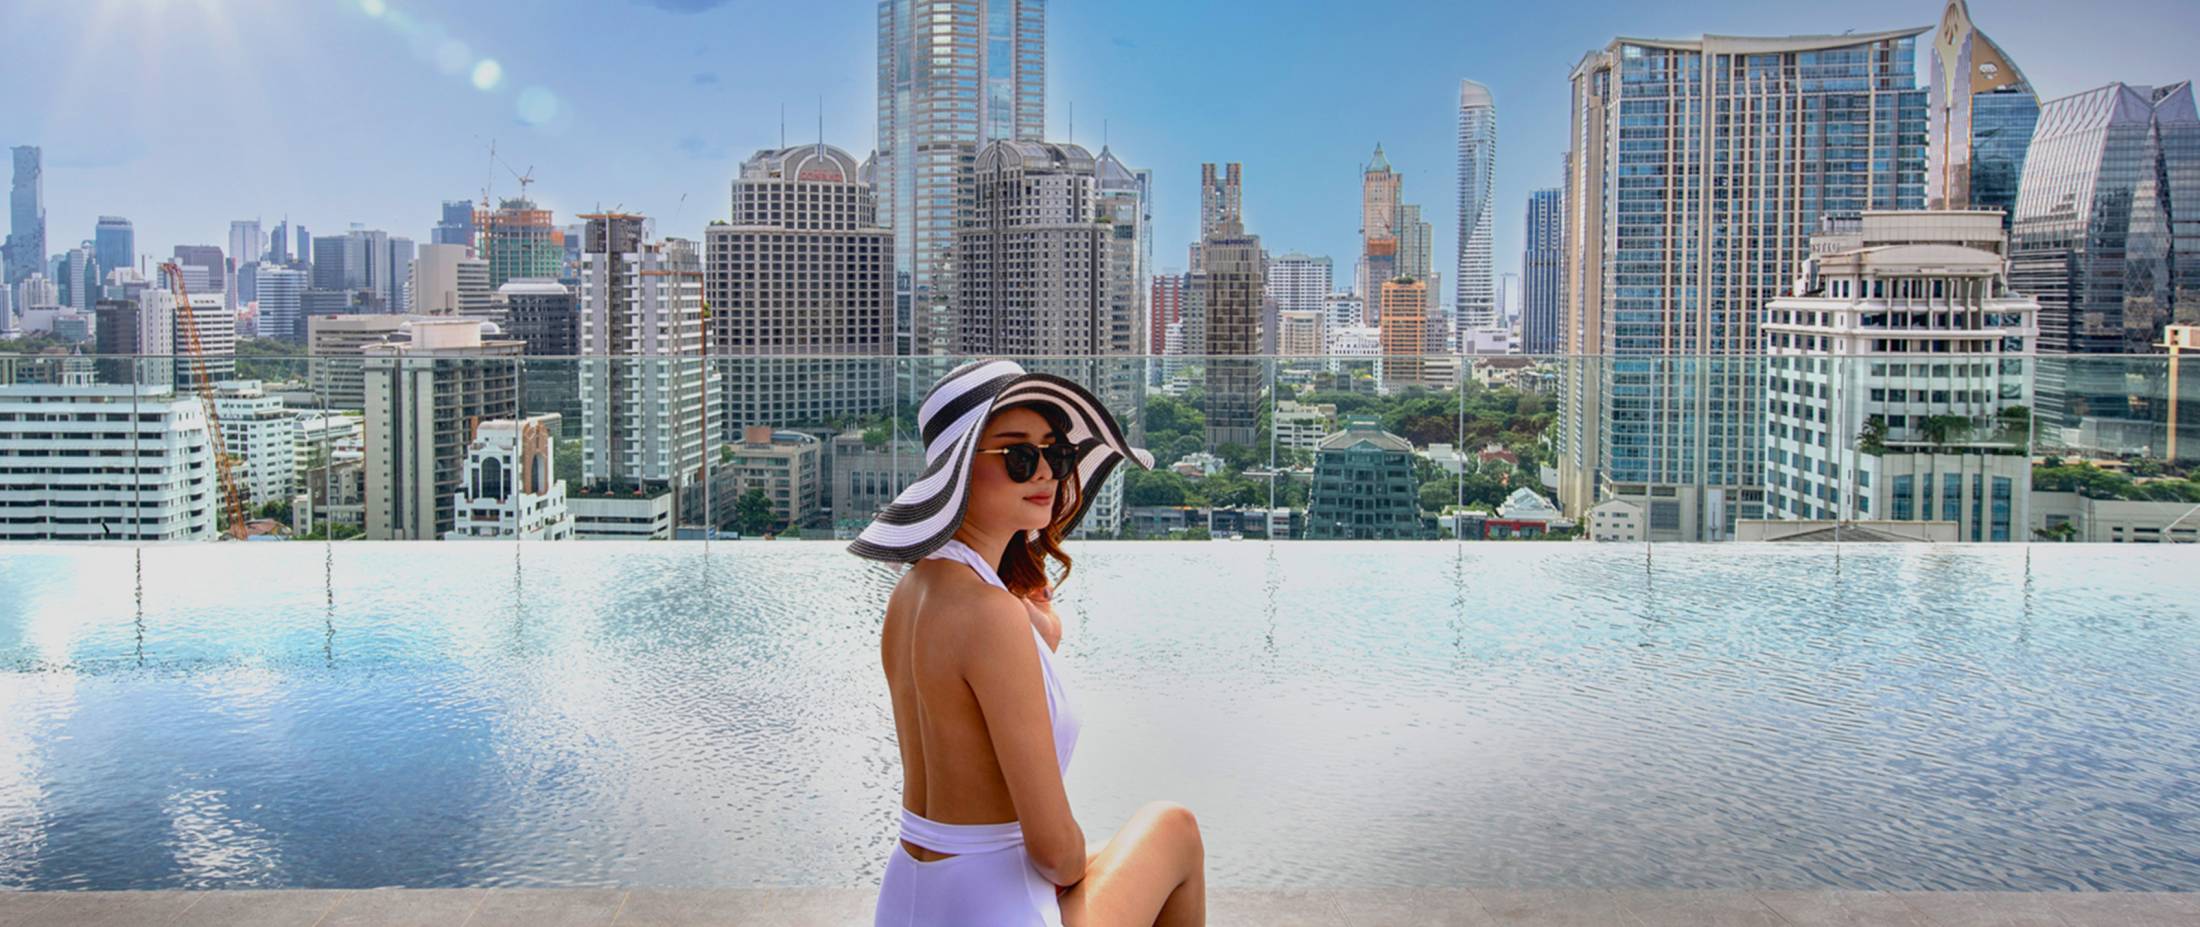 Make Thailand Yours | Le Club AccorHotels & Mastercard®